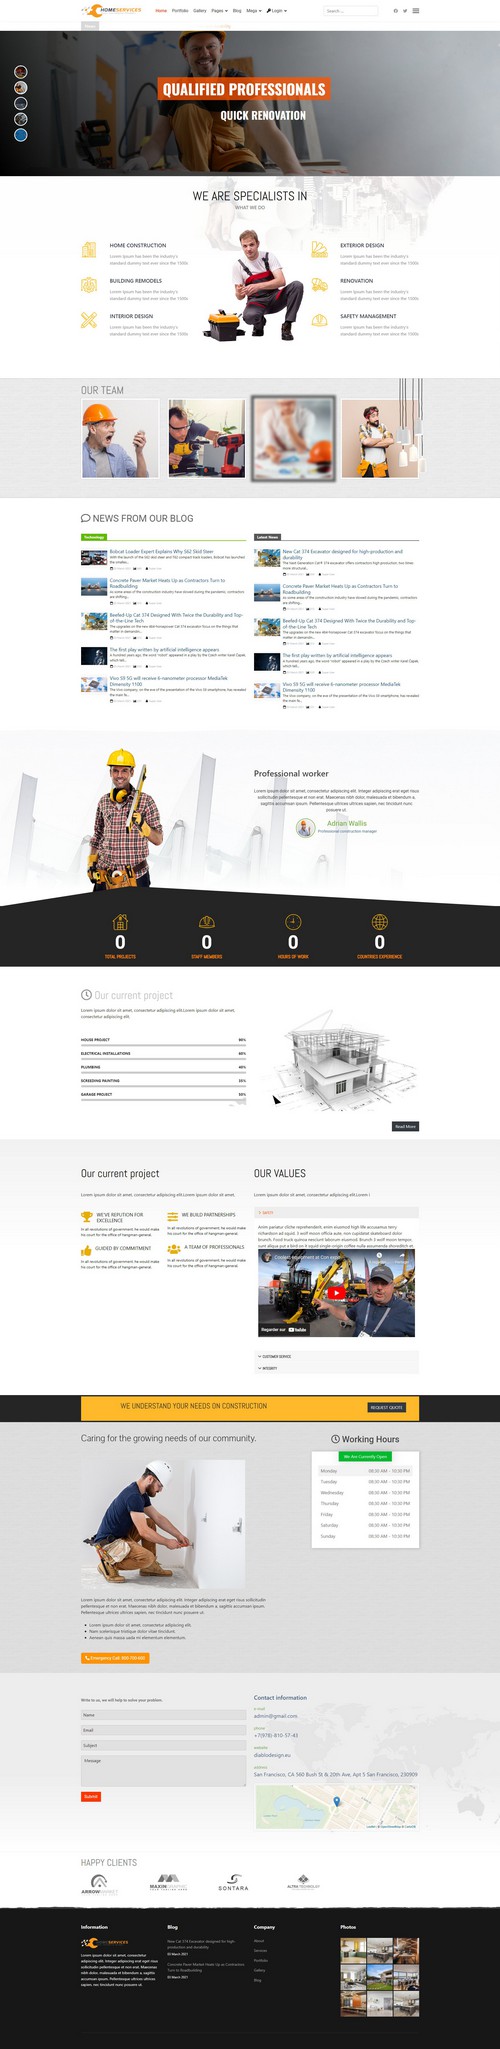 Homeservices - Renovation Business Sites Joomla Template